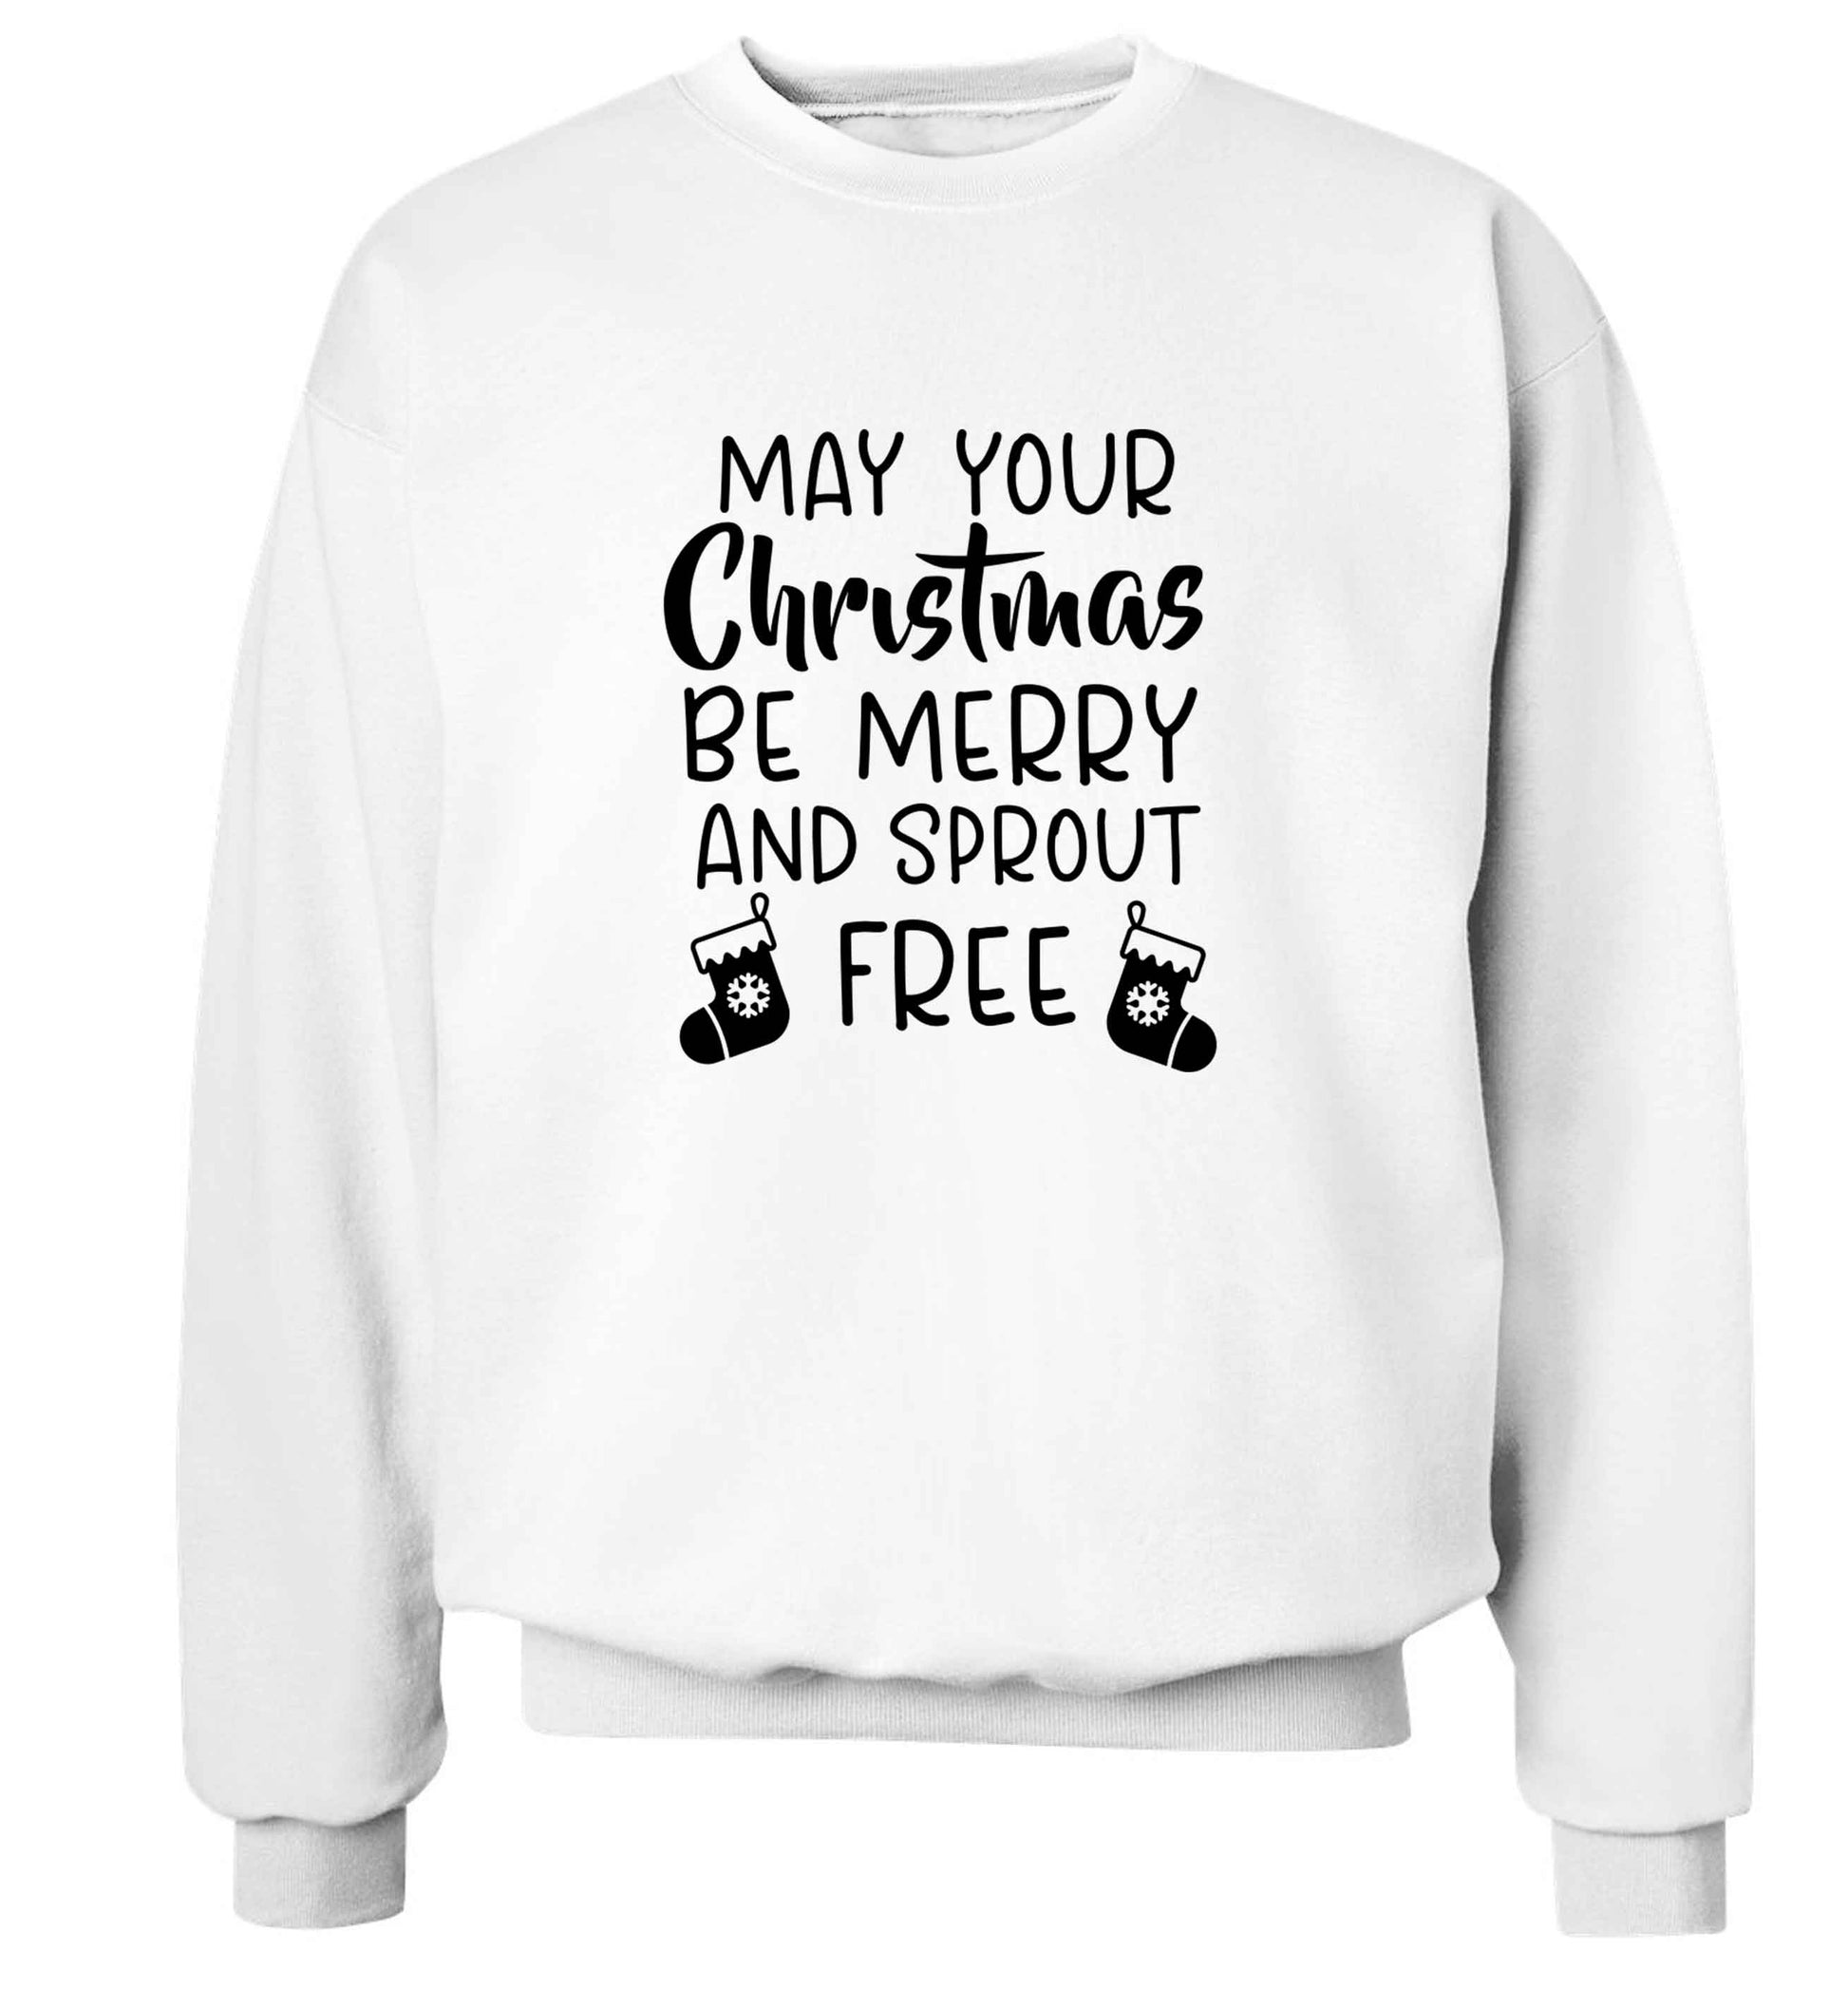 May your Christmas be merry and sprout free adult's unisex white sweater 2XL